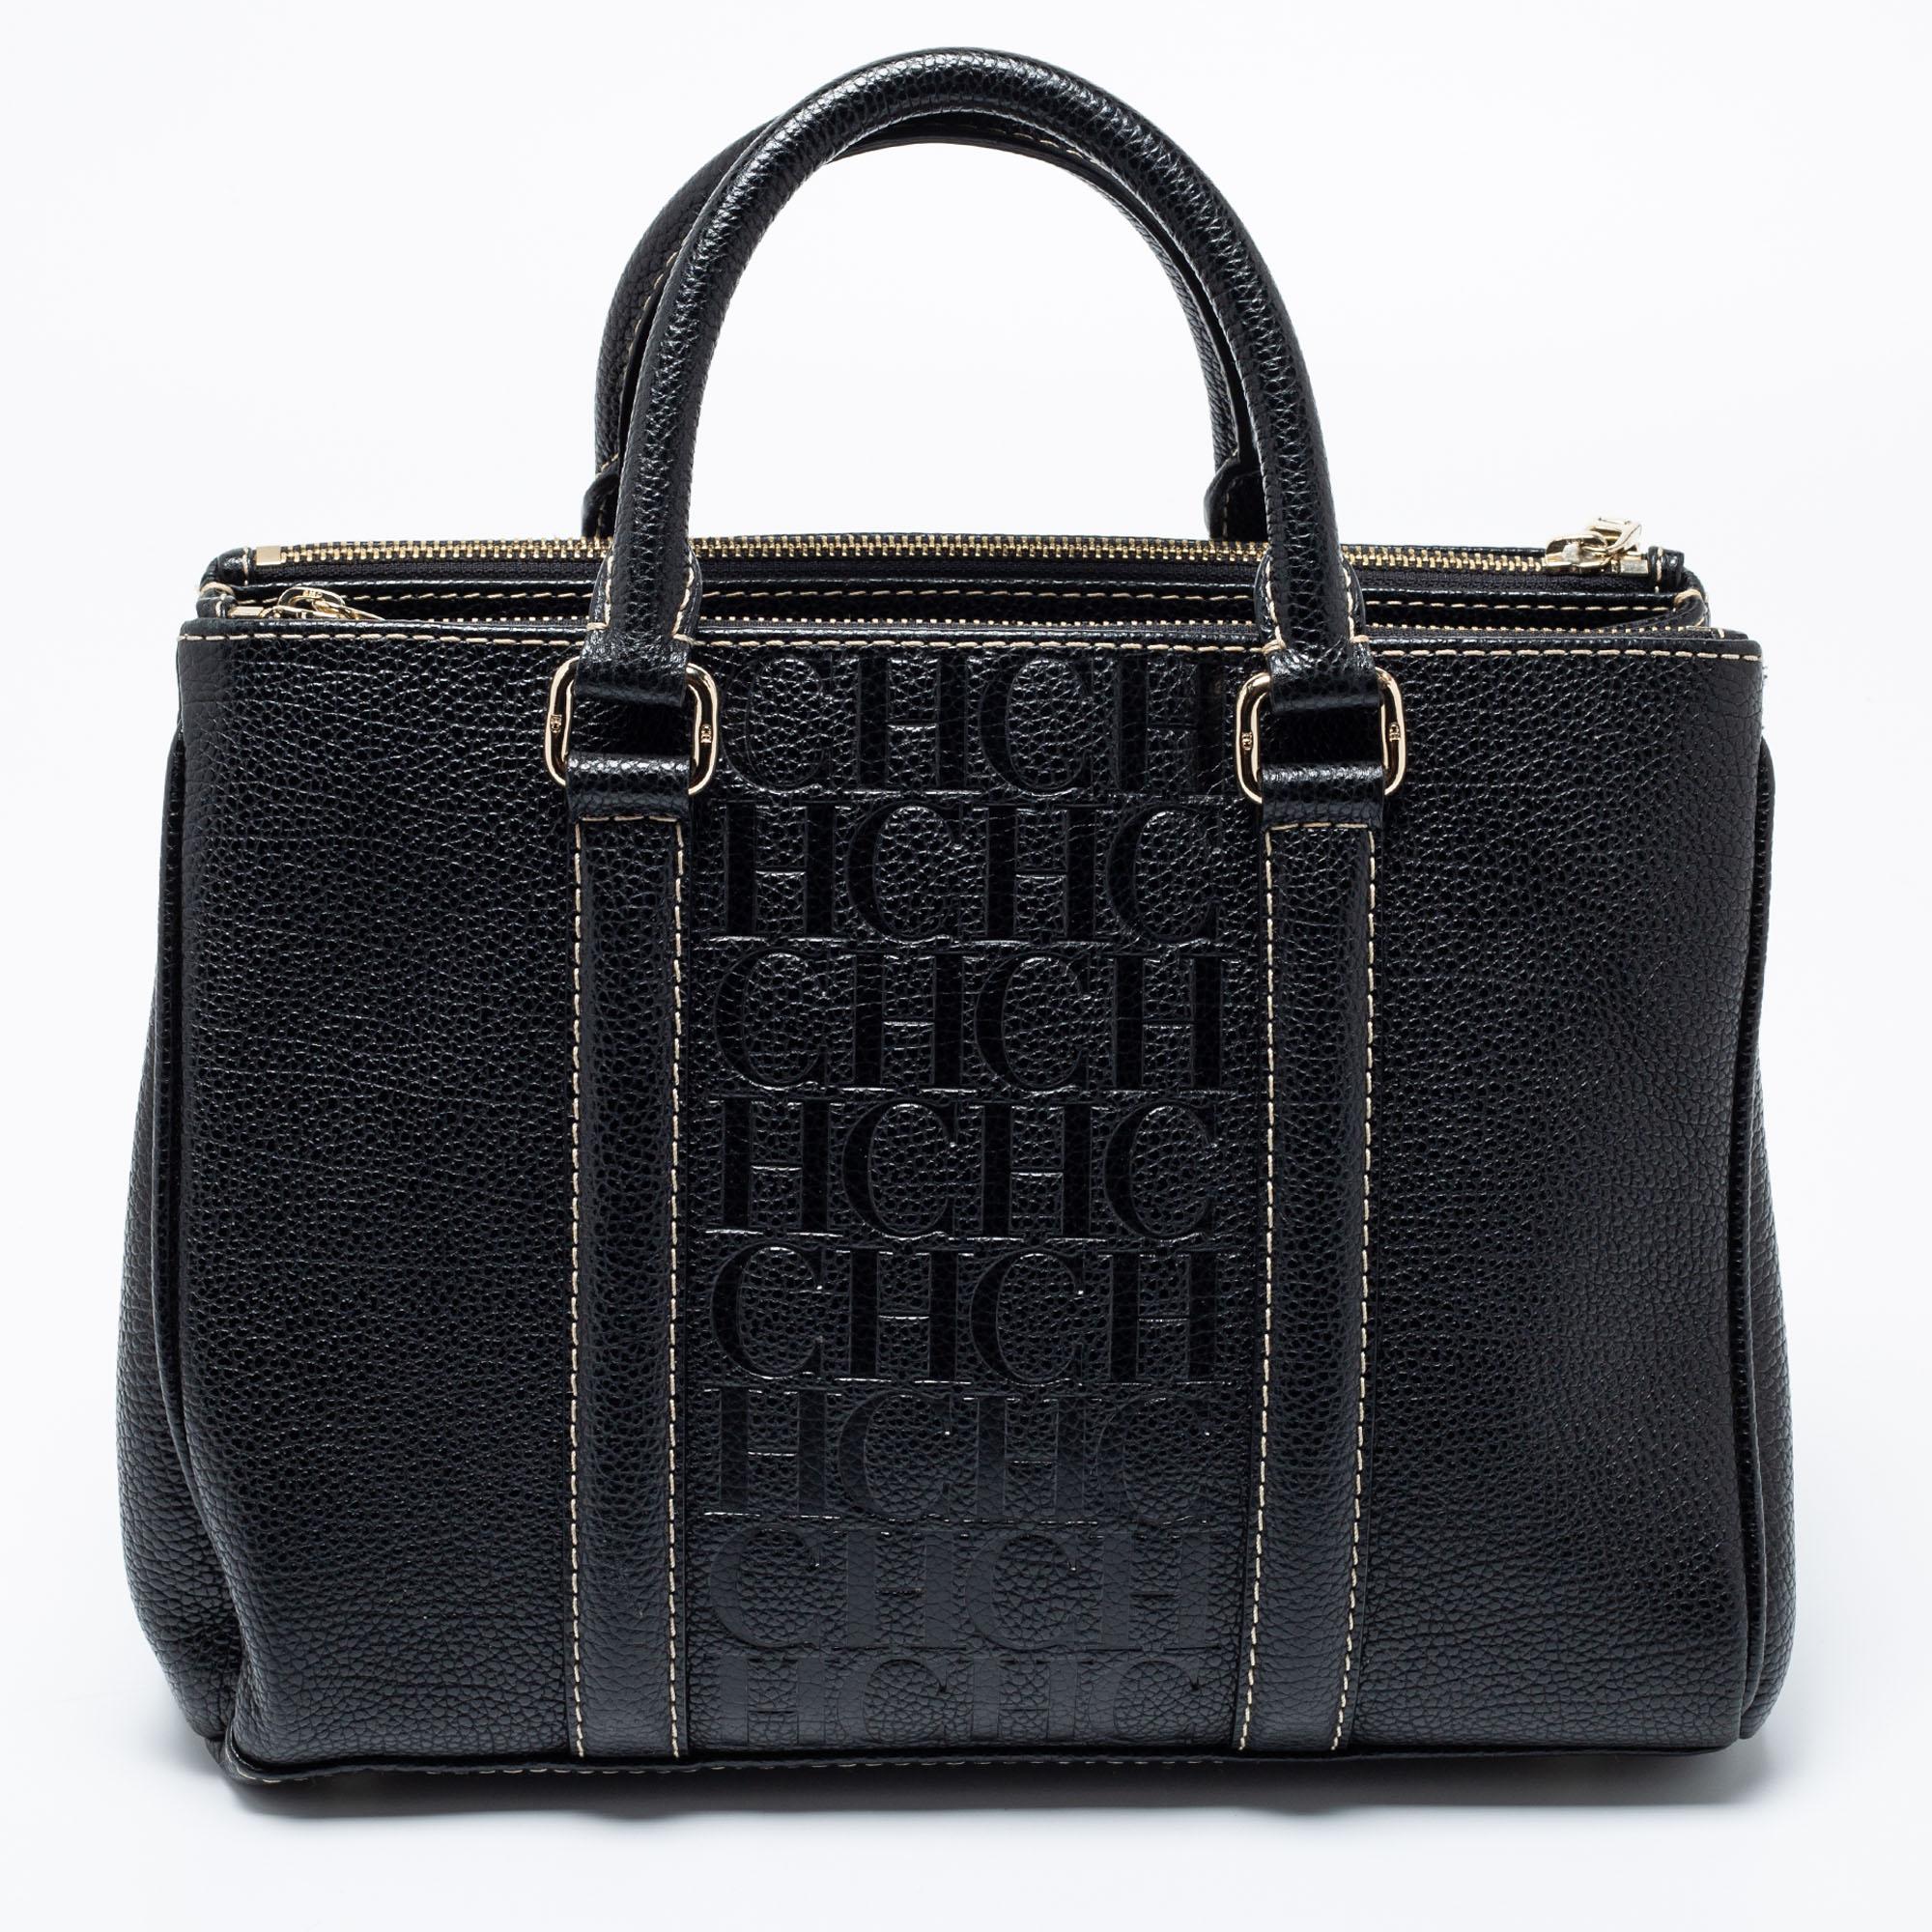 Skillfully designed, this Matteo tote from Carolina Herrera is an all-time favorite. It is made from leather and comes in a black shade. The beauty of the bag is enhanced with signature details on the front and gold-tone hardware. It comes equipped